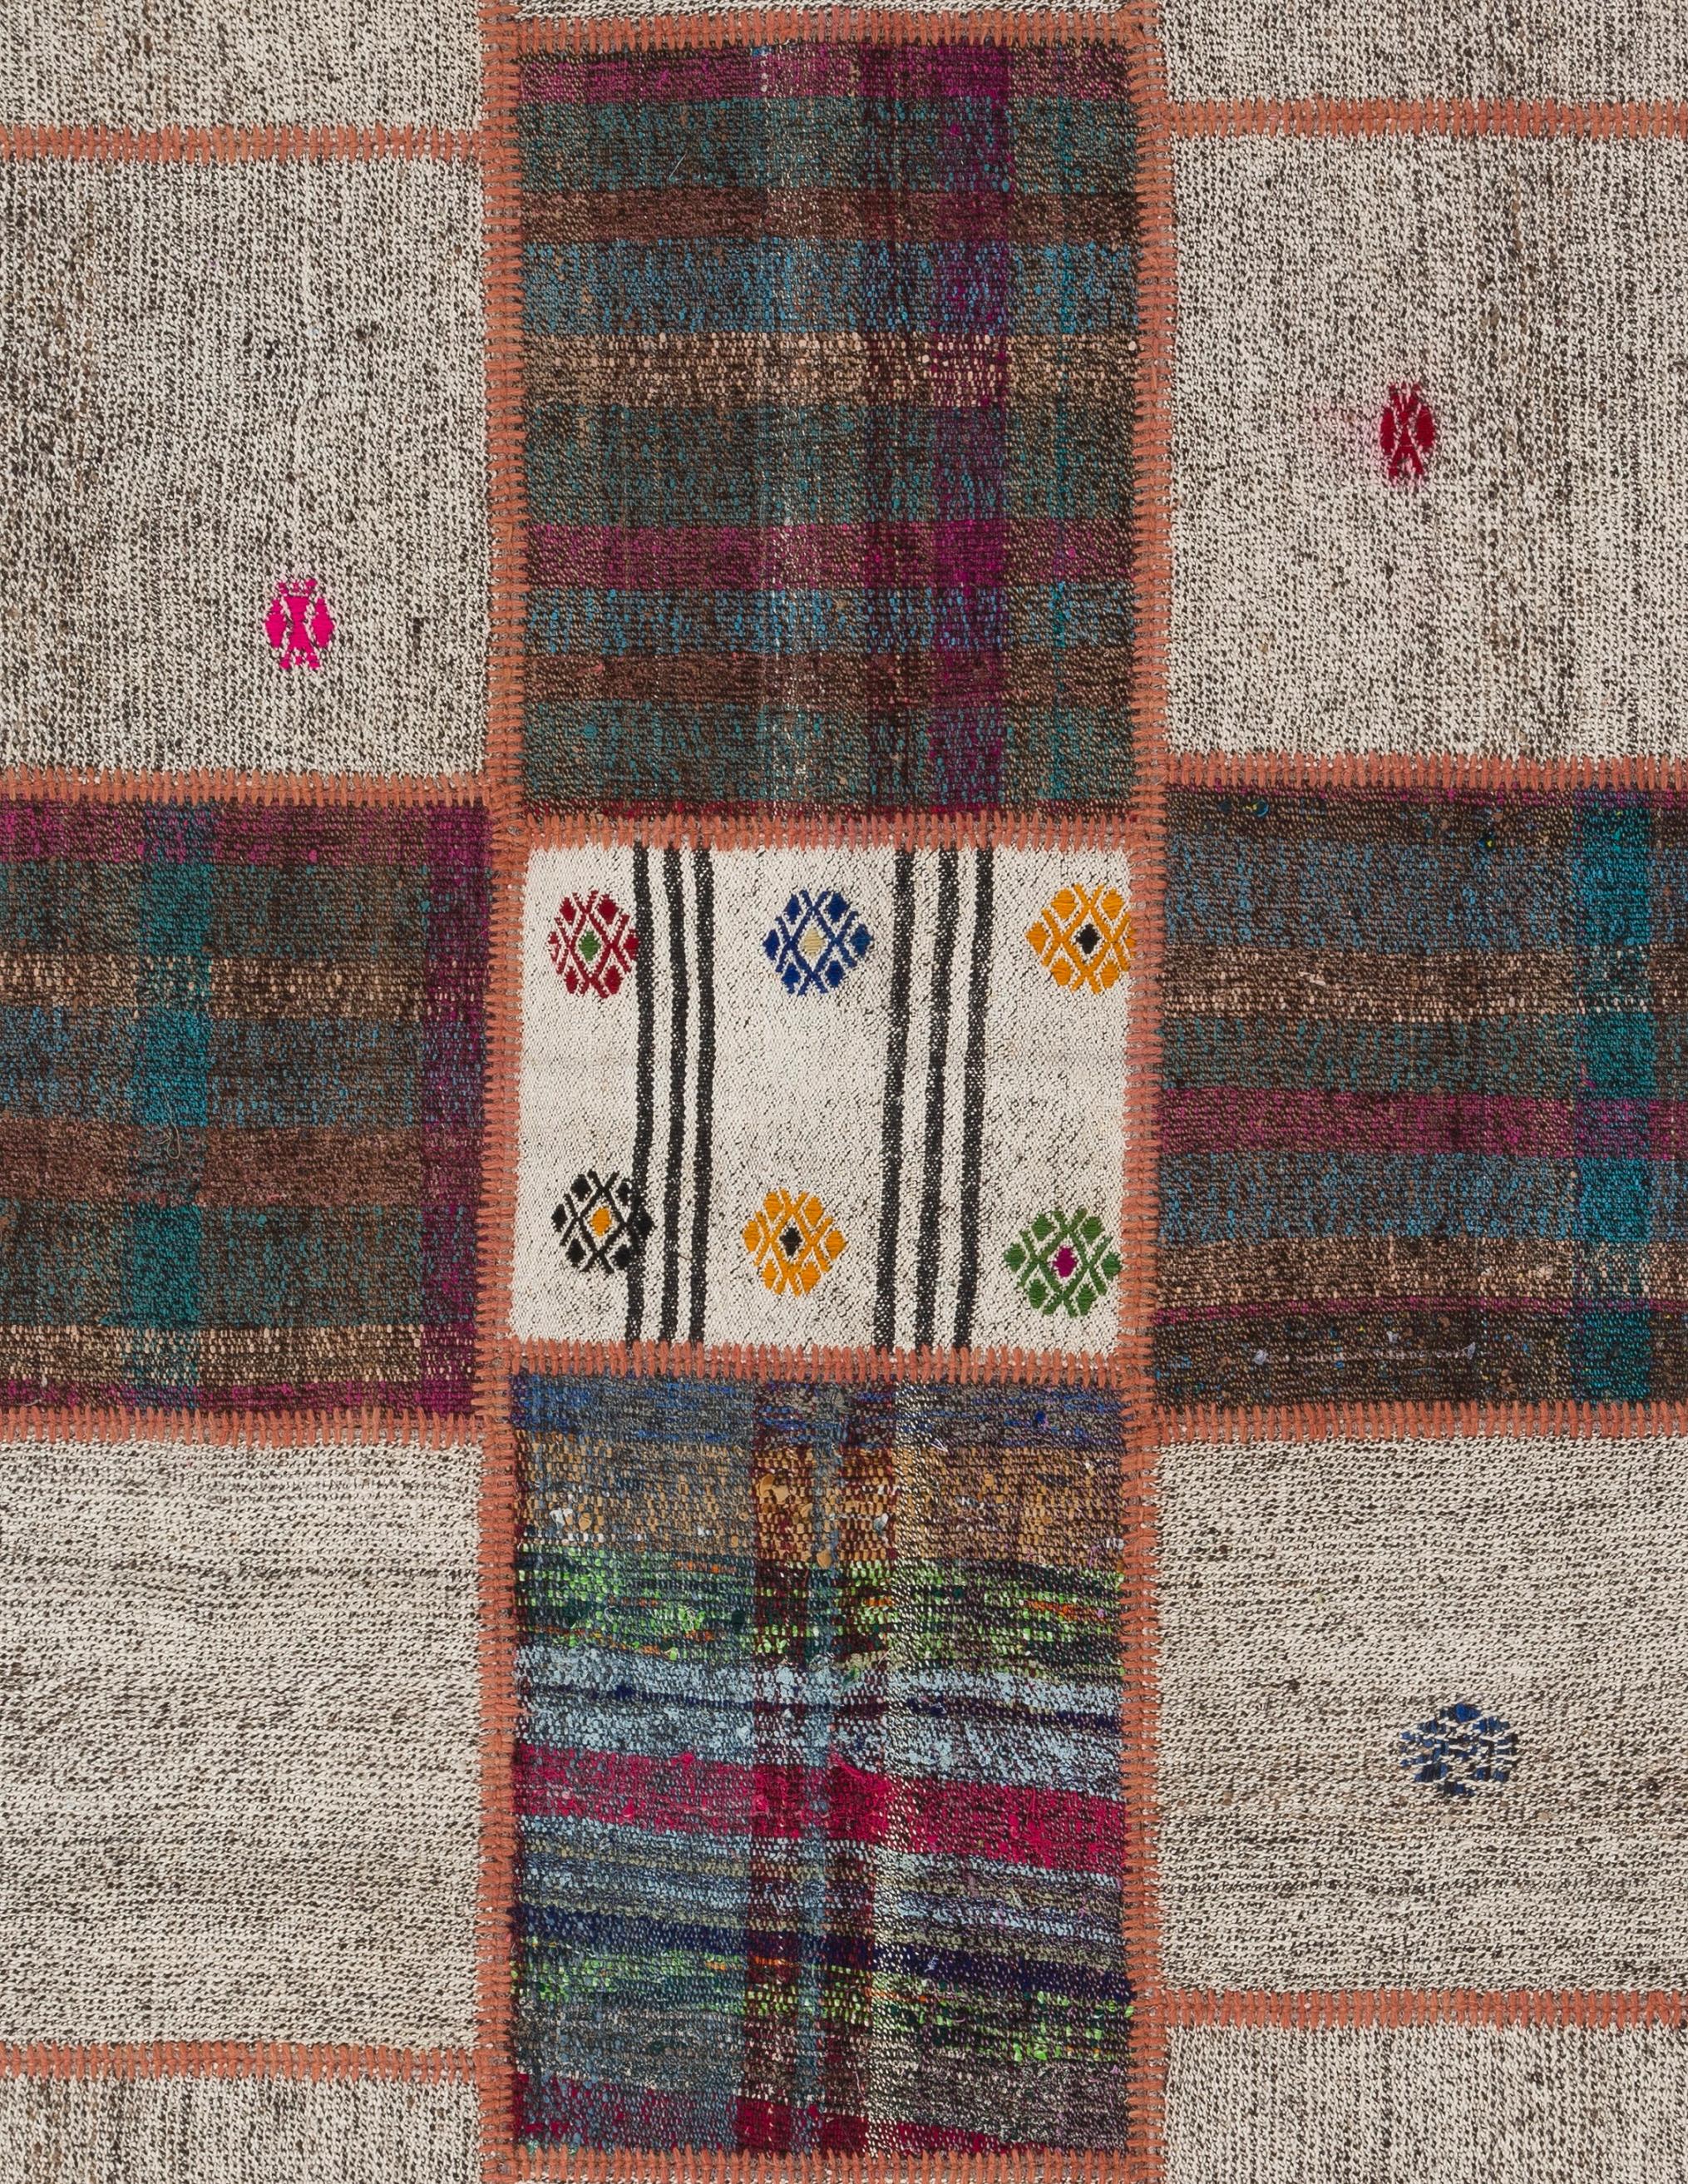 Hand-Woven 4.5x6.3 Ft Vintage Anatolian Kilims Re-Imagined, Custom Options Available For Sale